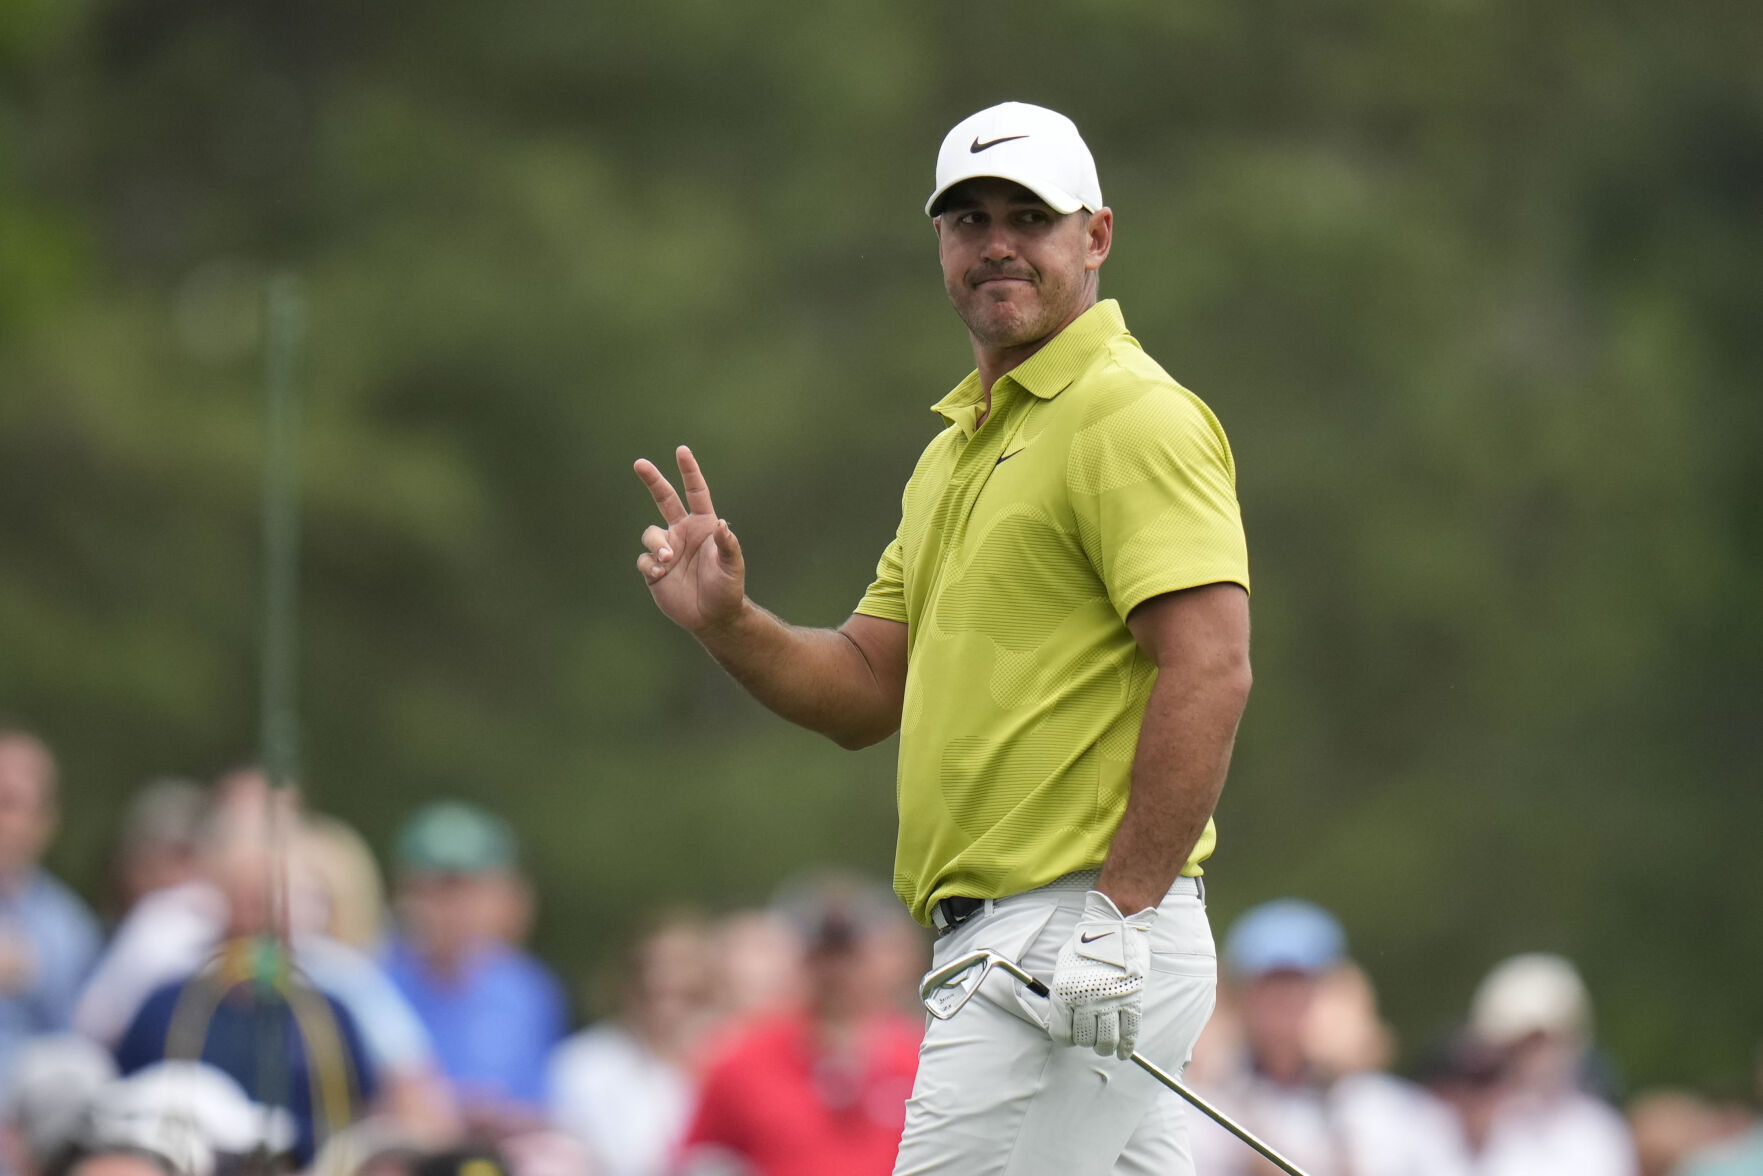 Koepka living large at Masters, leads with Rahm and Hovland